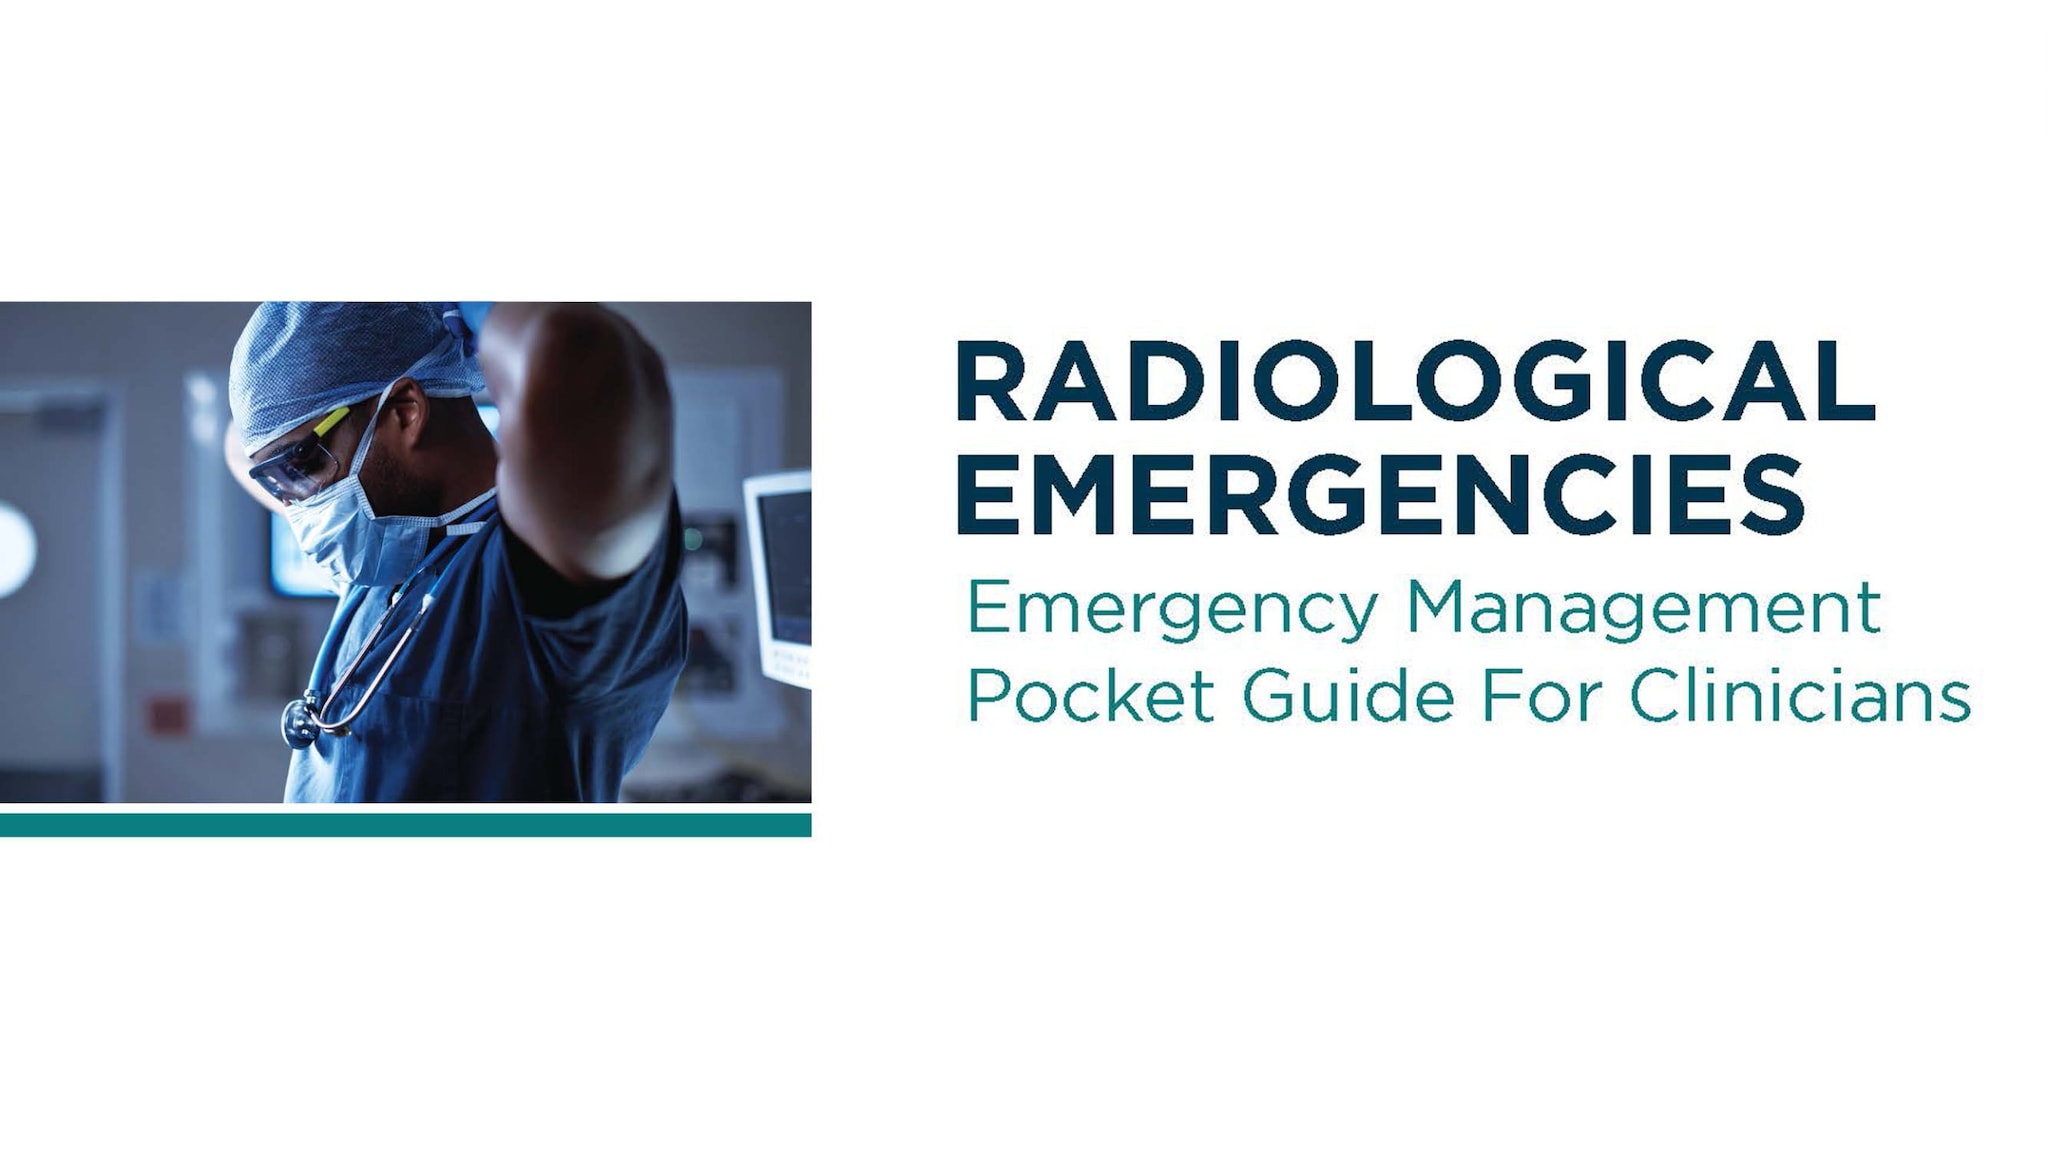 Emergency Management Pocket Guide for Clinicians